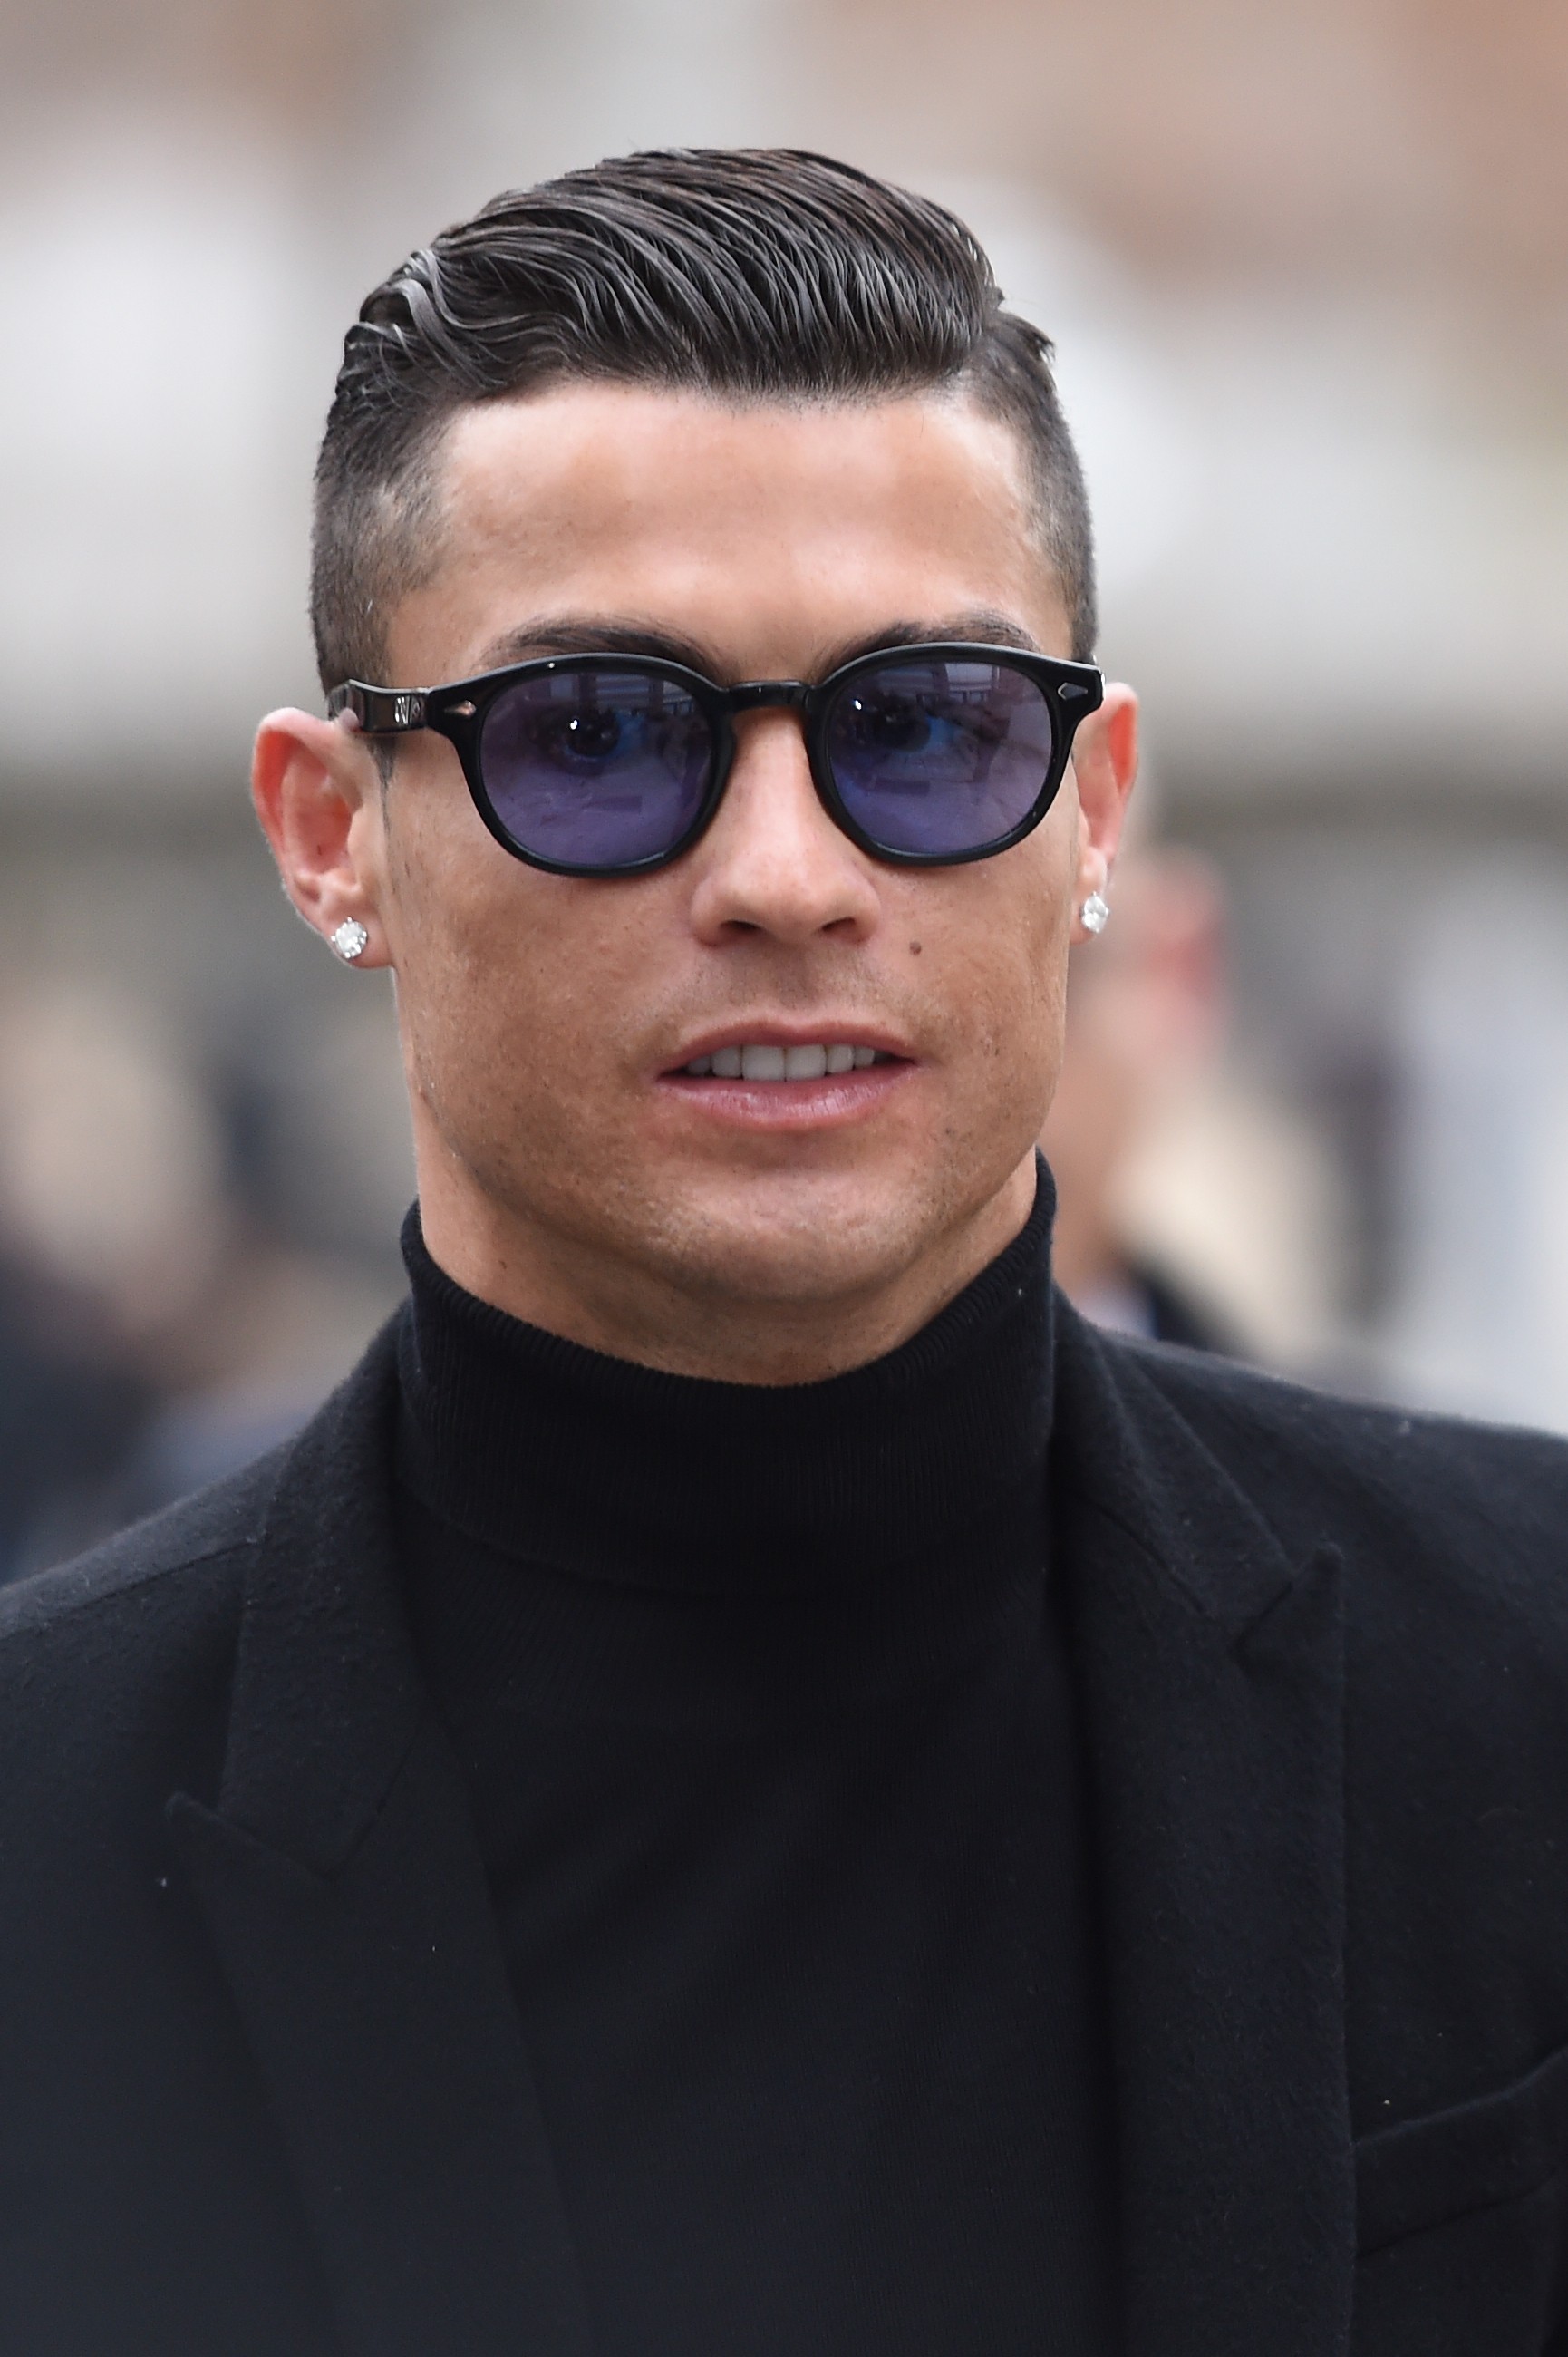 MADRID, SPAIN - JANUARY 22: Cristiano Ronaldo arrives at the Audiencia Provincial de Madrid court on January 22, 2019 in Madrid, Spain. The Juventus footballer is accused of failing to pay tax on his image rights between 2011 and 2014. (Photo by Denis Doy (Foto: GC Images)